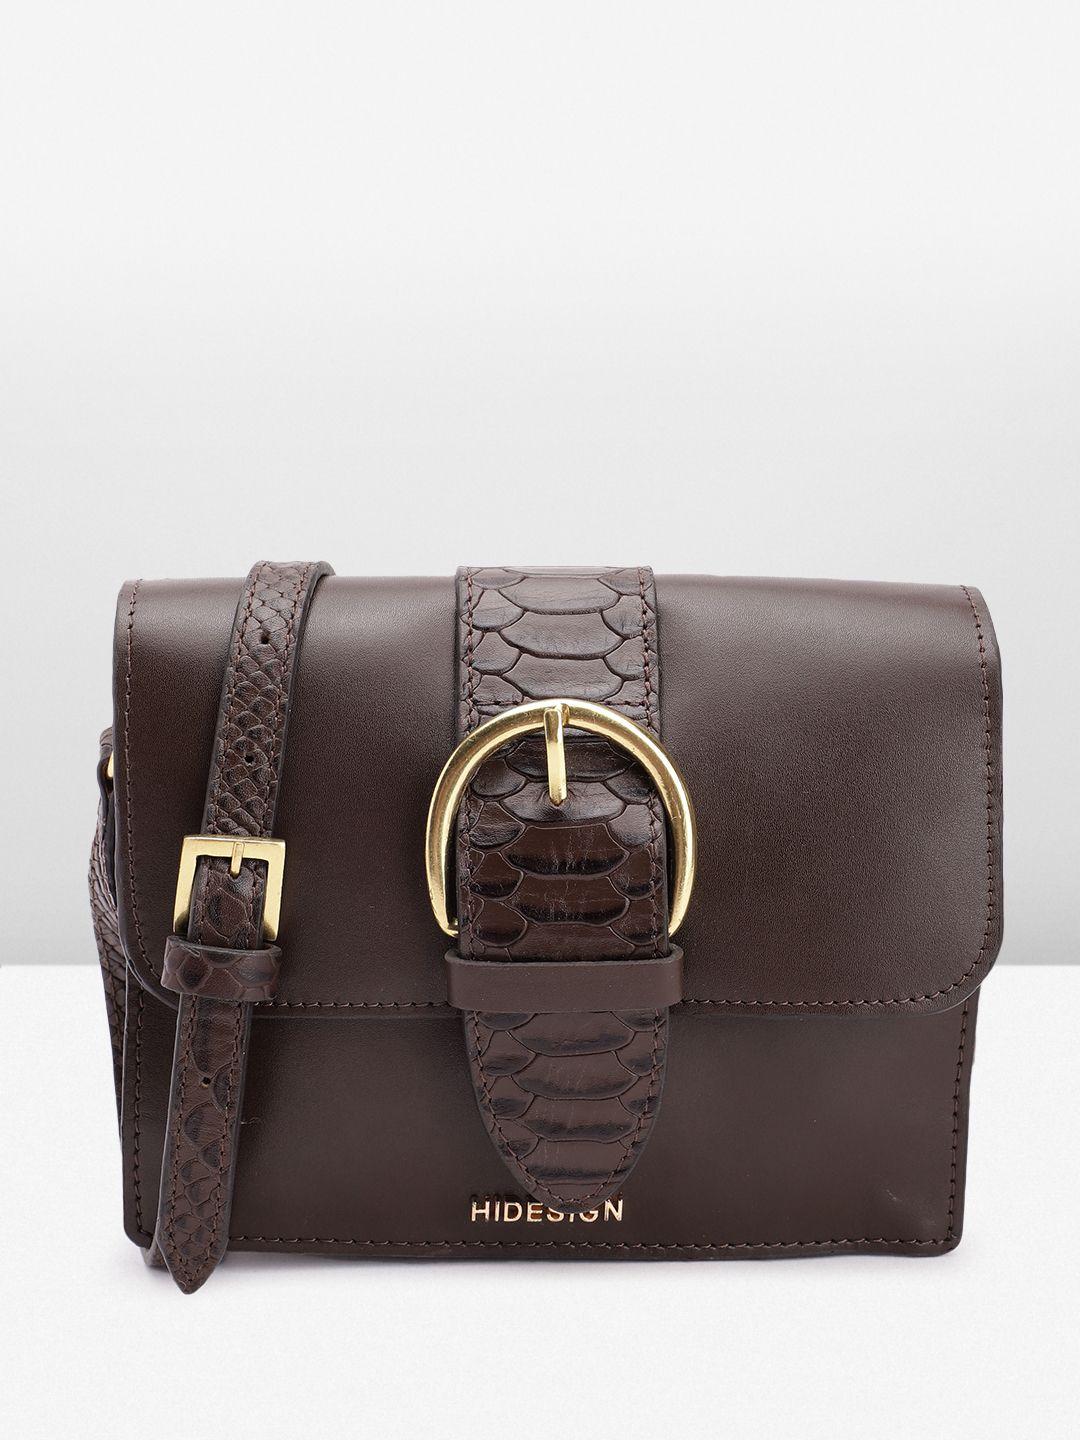 hidesign leather structured sling bag with croc textured & buckle detail